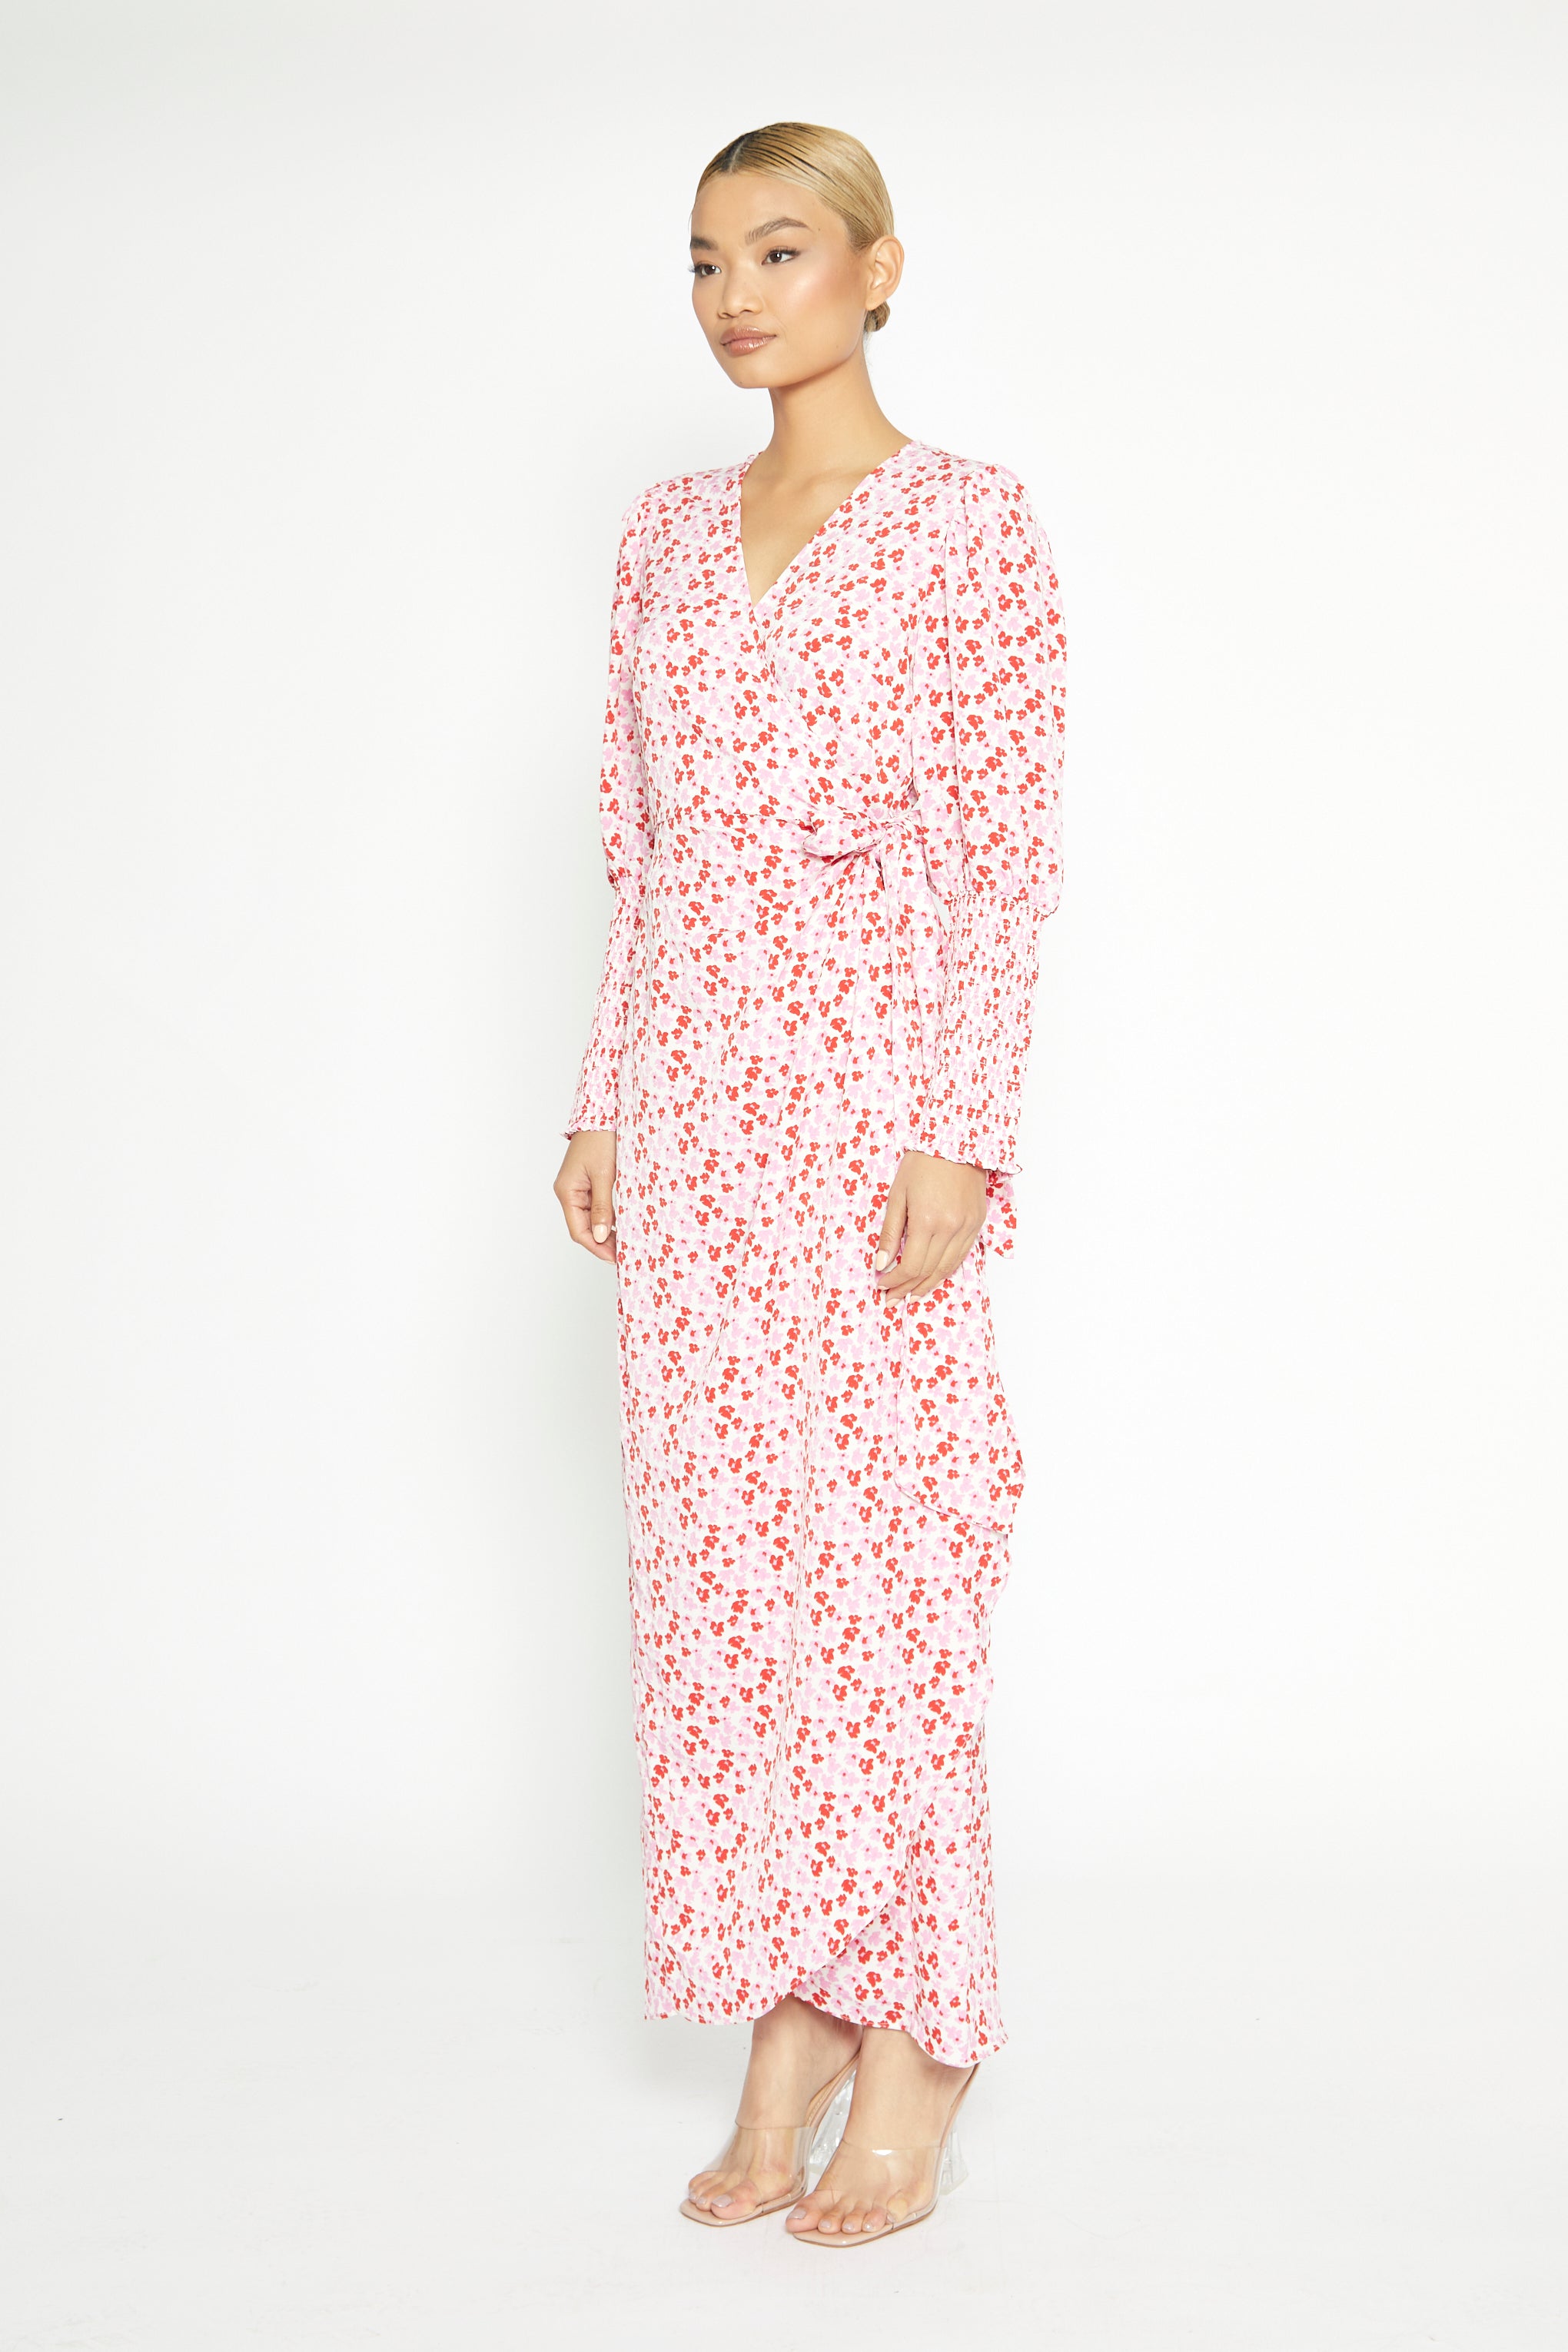 White-Red-Pink-Floral Wrap Maxi Dress